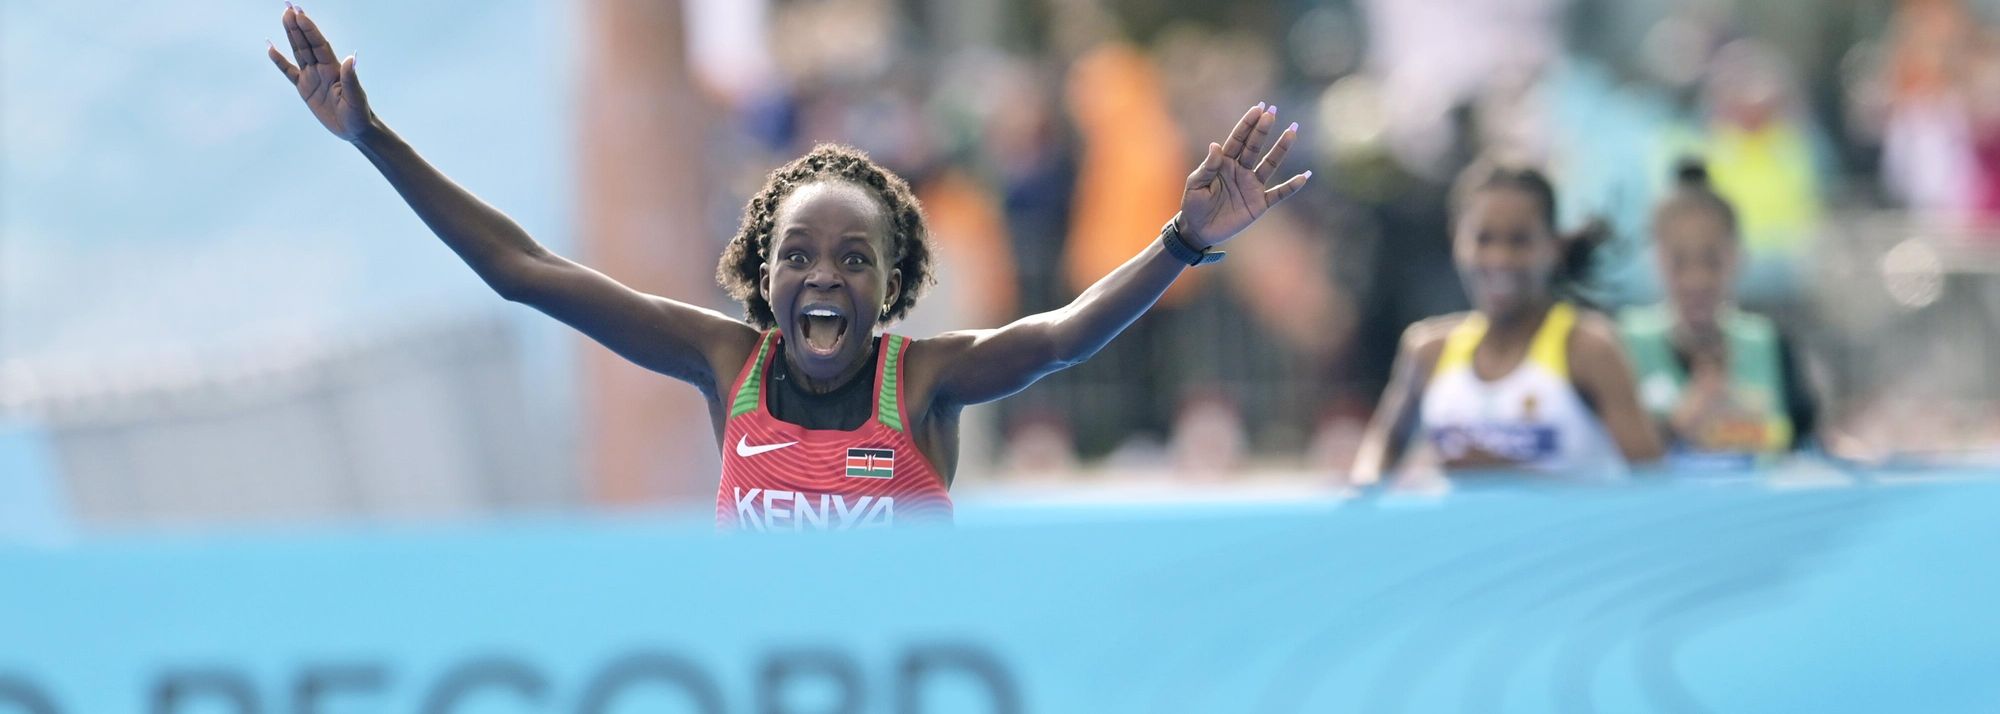 In an arena where endurance is king, speed also proved a precious commodity. In the end, Peres Jepchirchir needed both to reign supreme in the women’s race at the World Athletics Half Marathon Championships Gdynia 2020 on Saturday (17), powering to gold in 1:05:16, a world record in a women-only race.